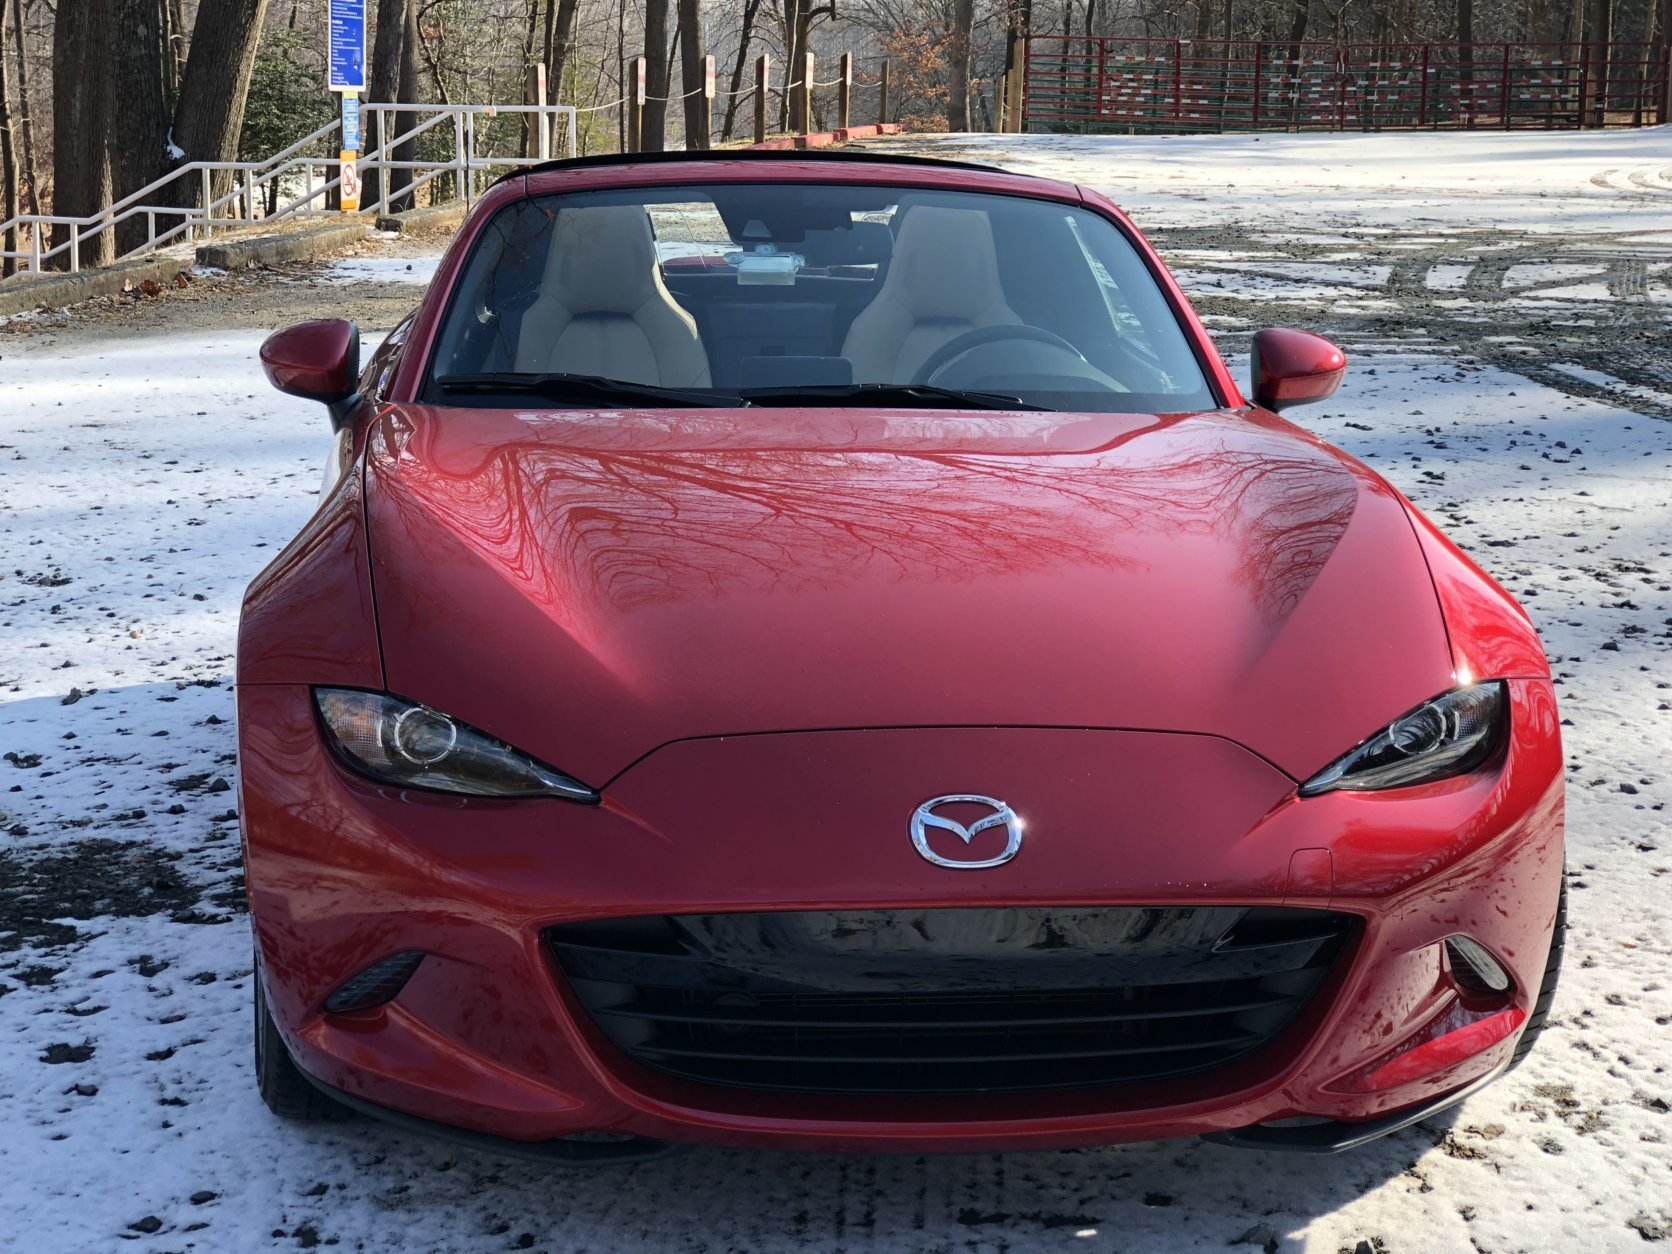 The front end of the new generation Miata looks angry; gone is the smile from Miata’s of the past. (WTOP/Mike Parris)